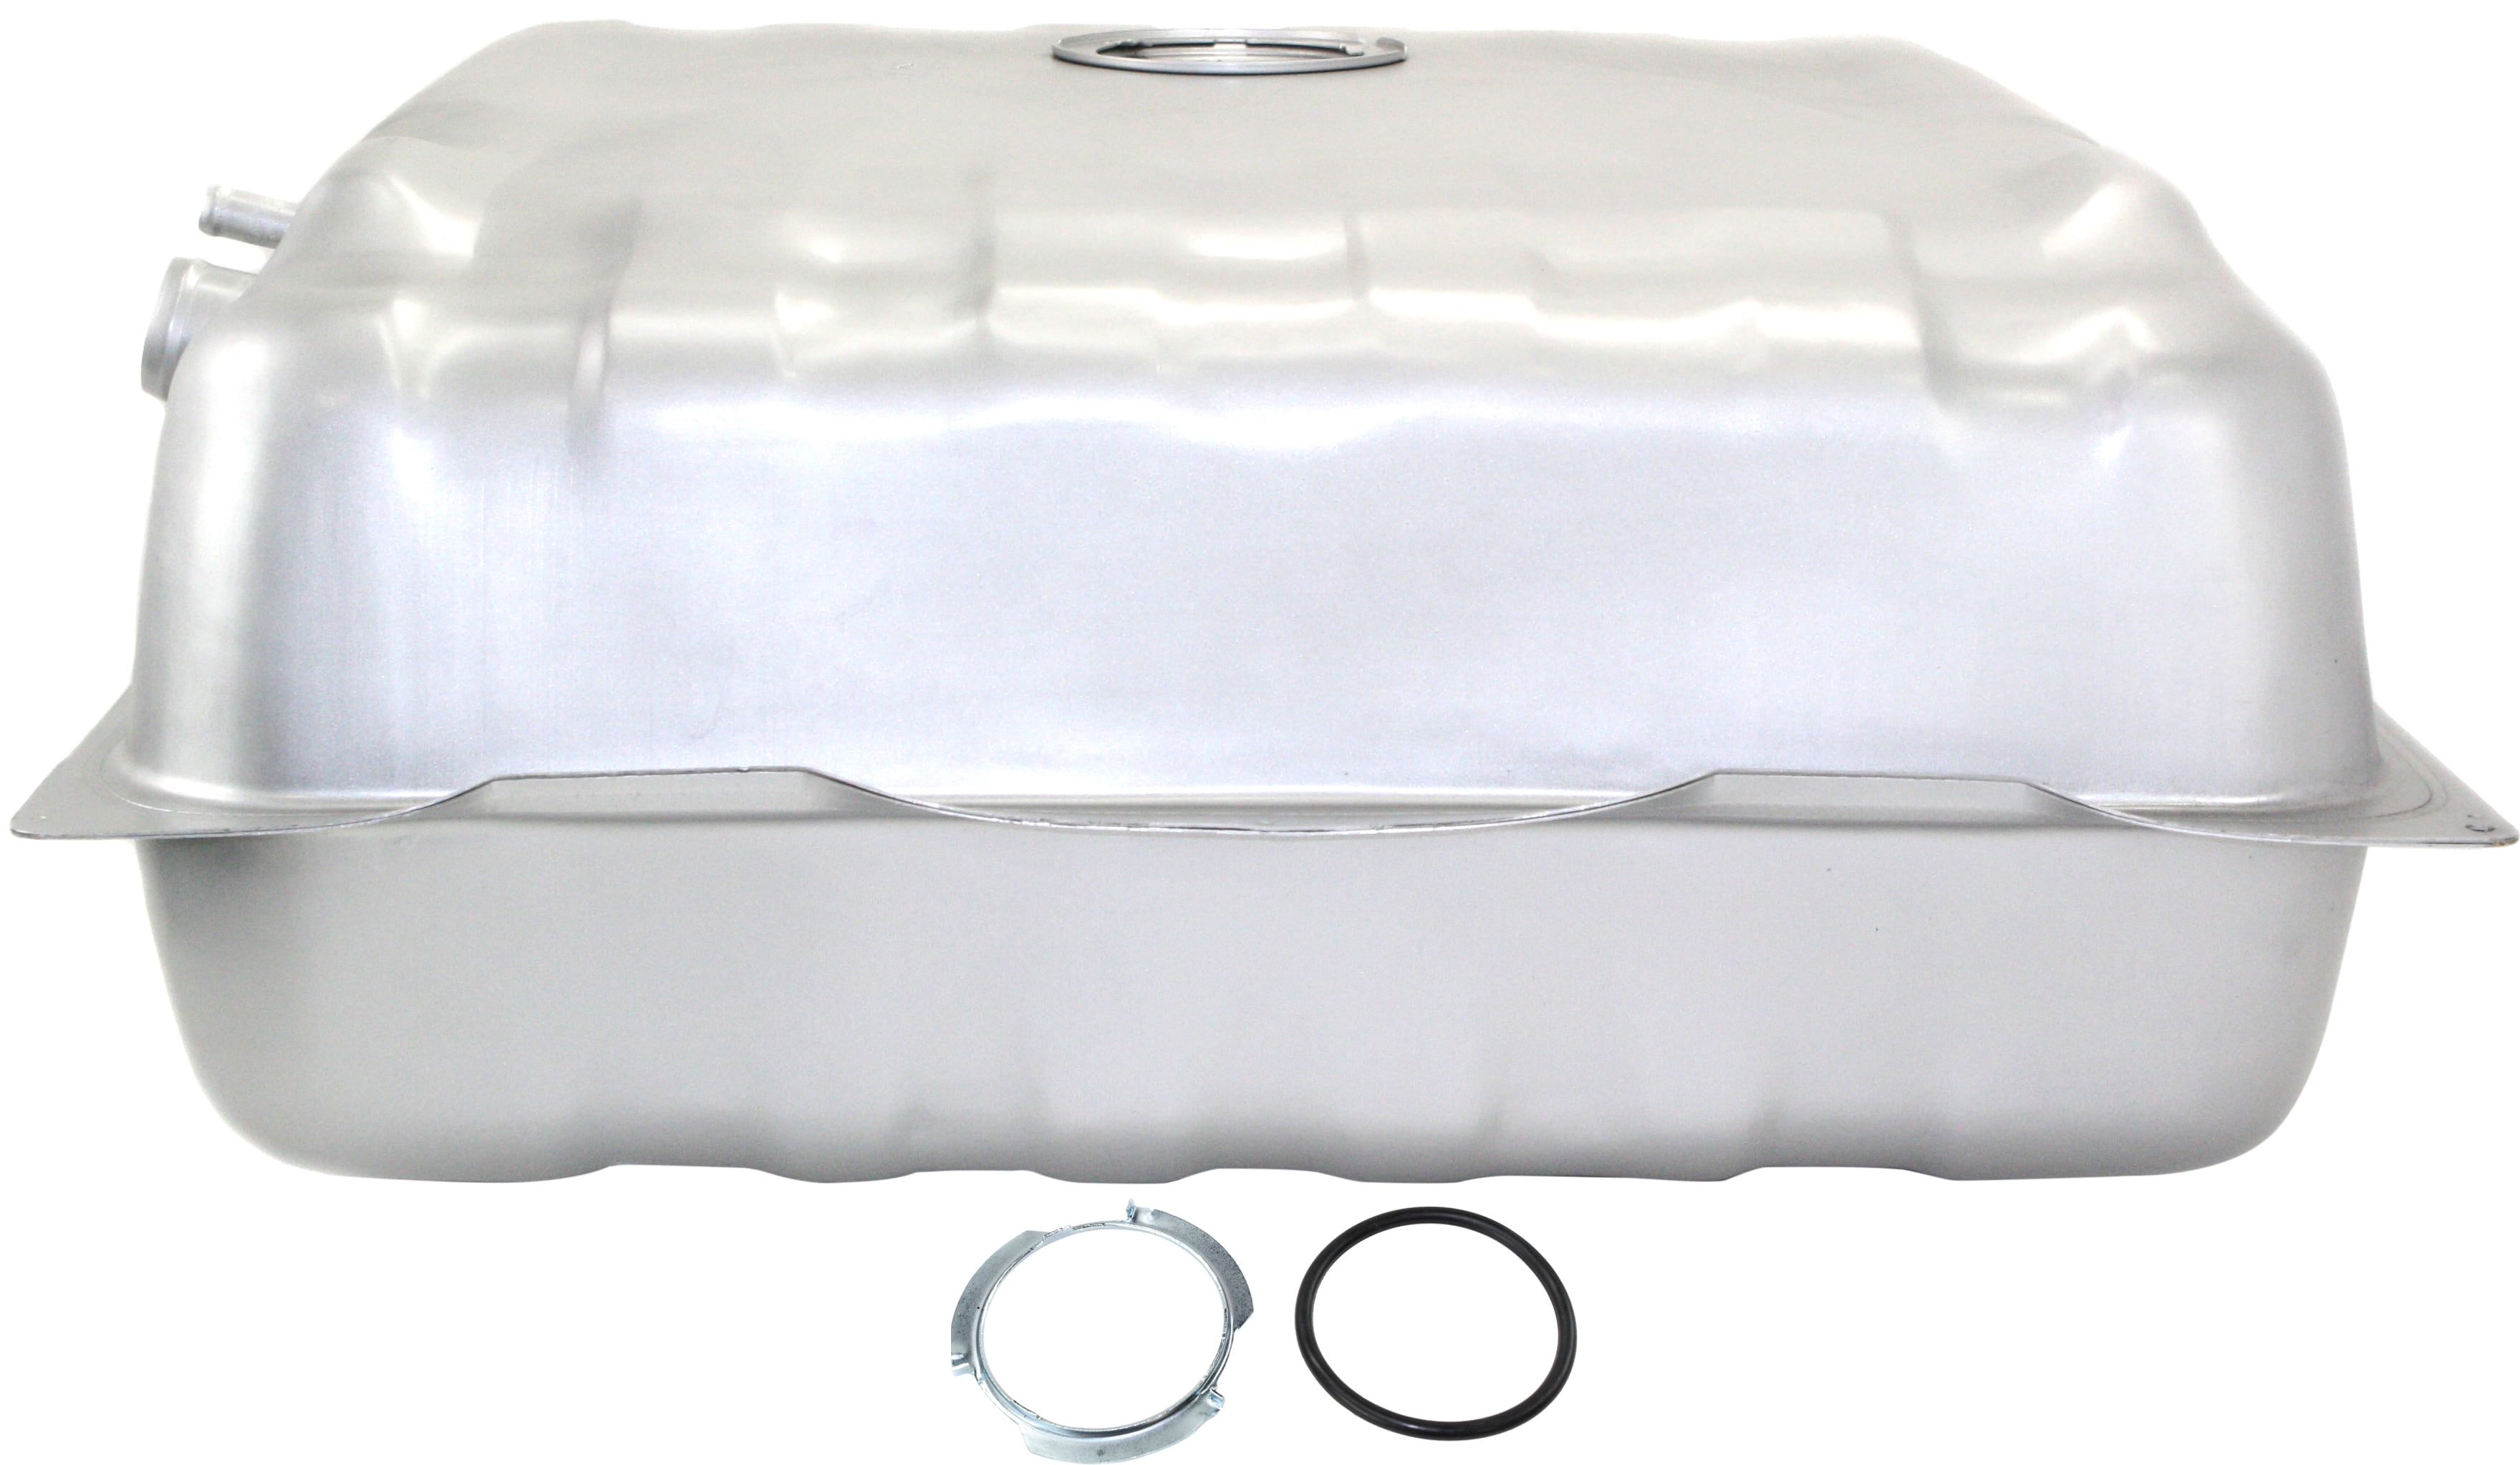 Replacement C670174 Fuel Tank Compatible with 1987-1997 Chevrolet P30  1987-1989 GMC P2500 40 gallons / 151 liters